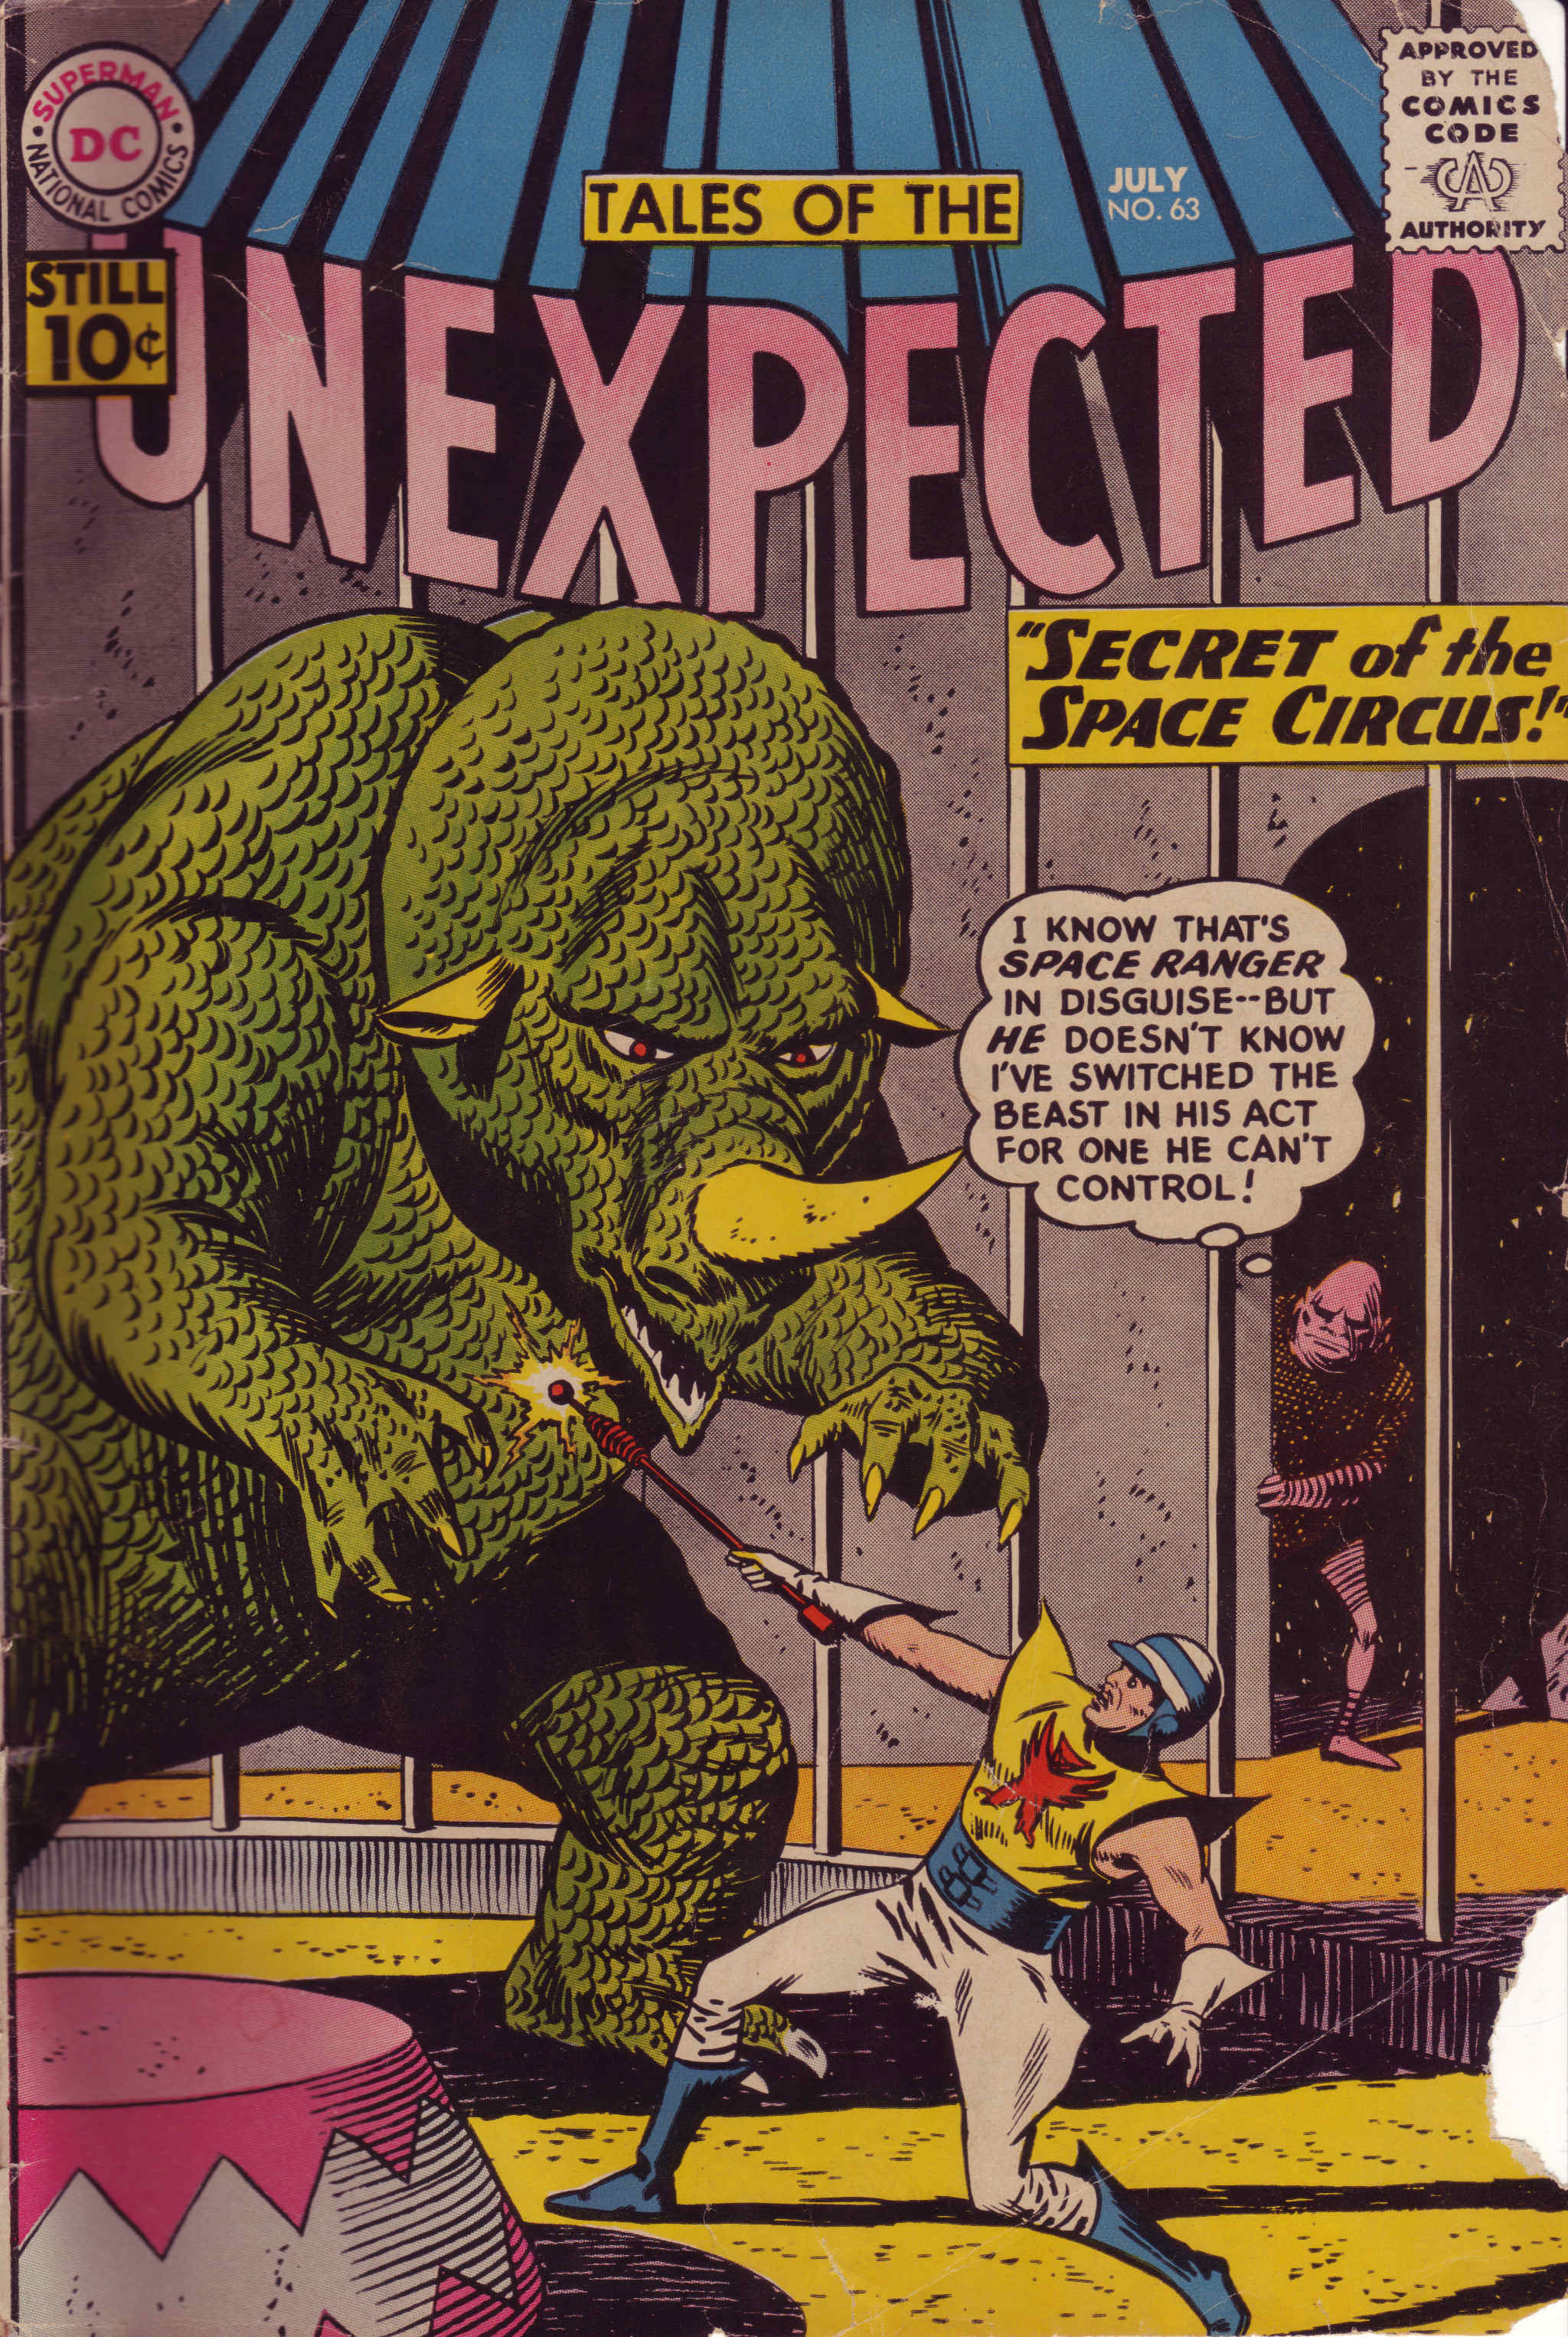 Read online Tales of the Unexpected comic -  Issue #63 - 1